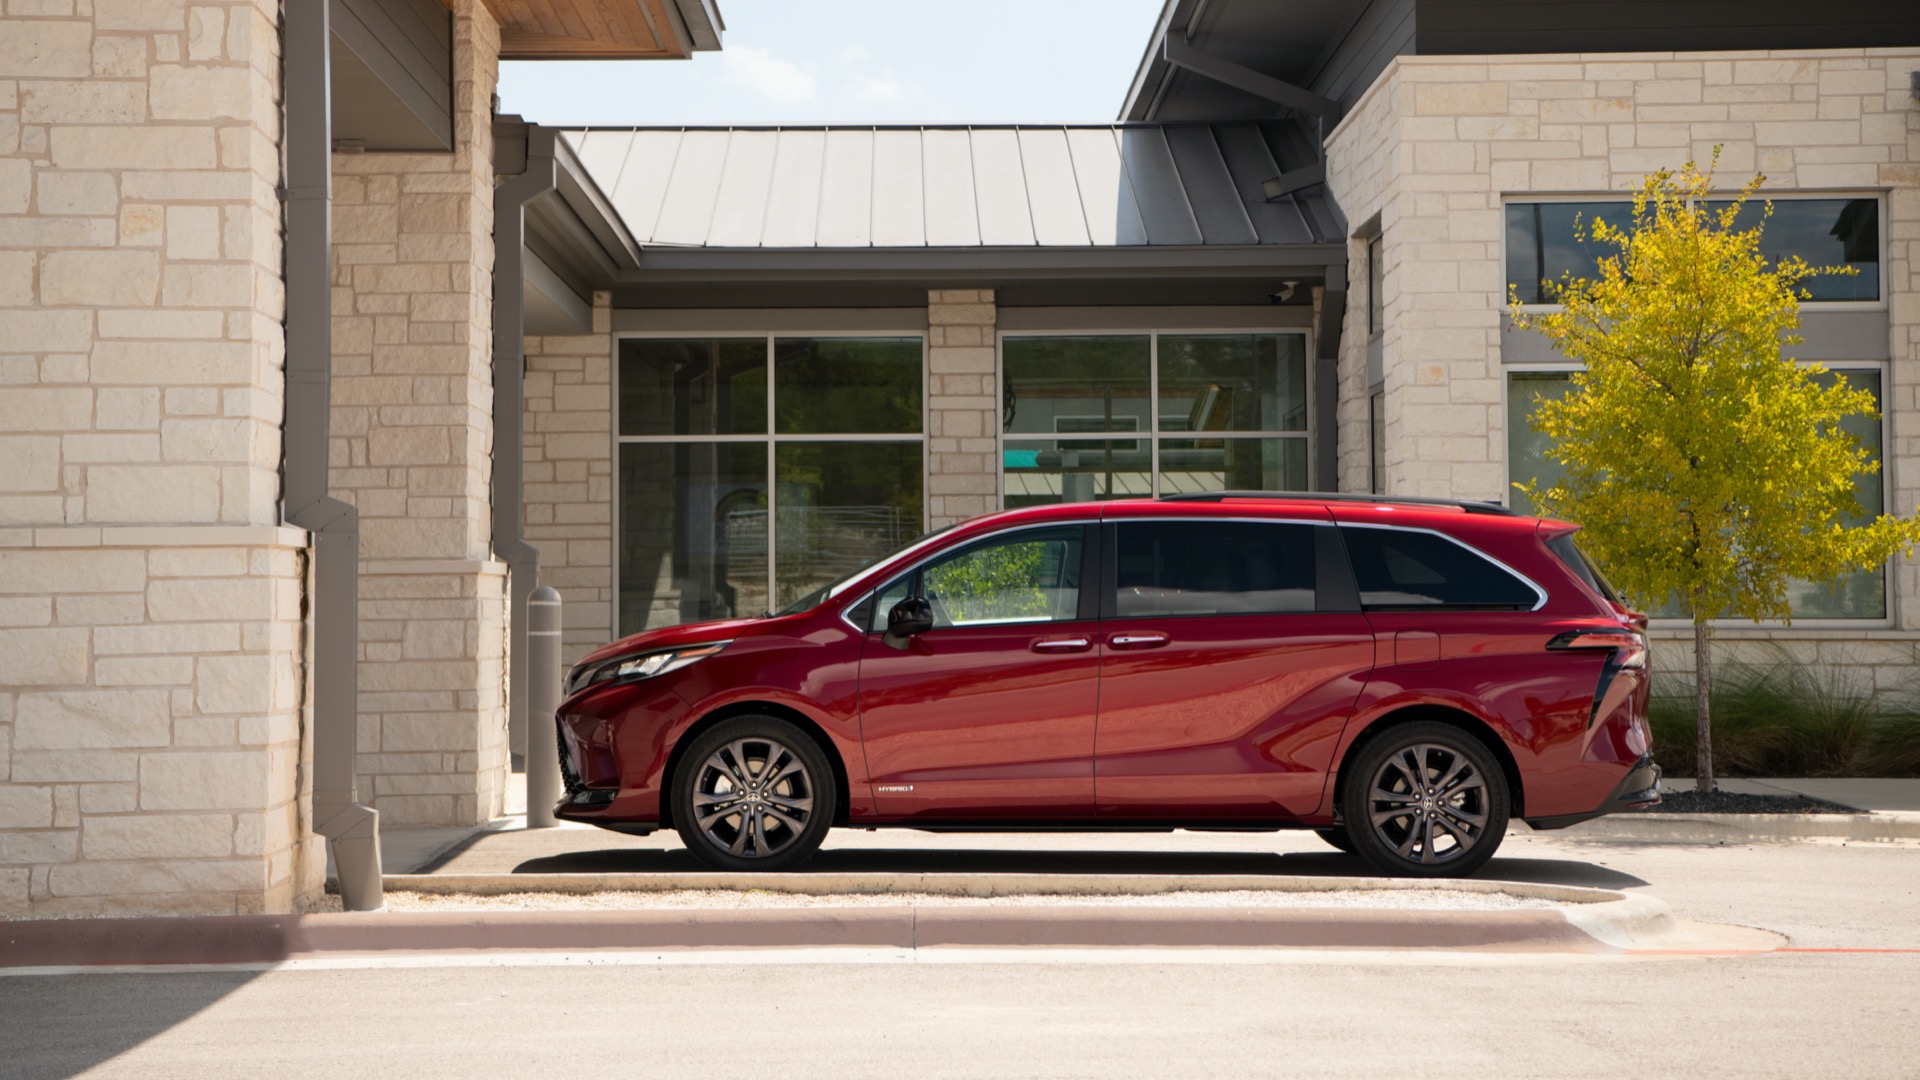 New And Used Toyota Sienna Prices Photos Reviews Specs The Car Connection